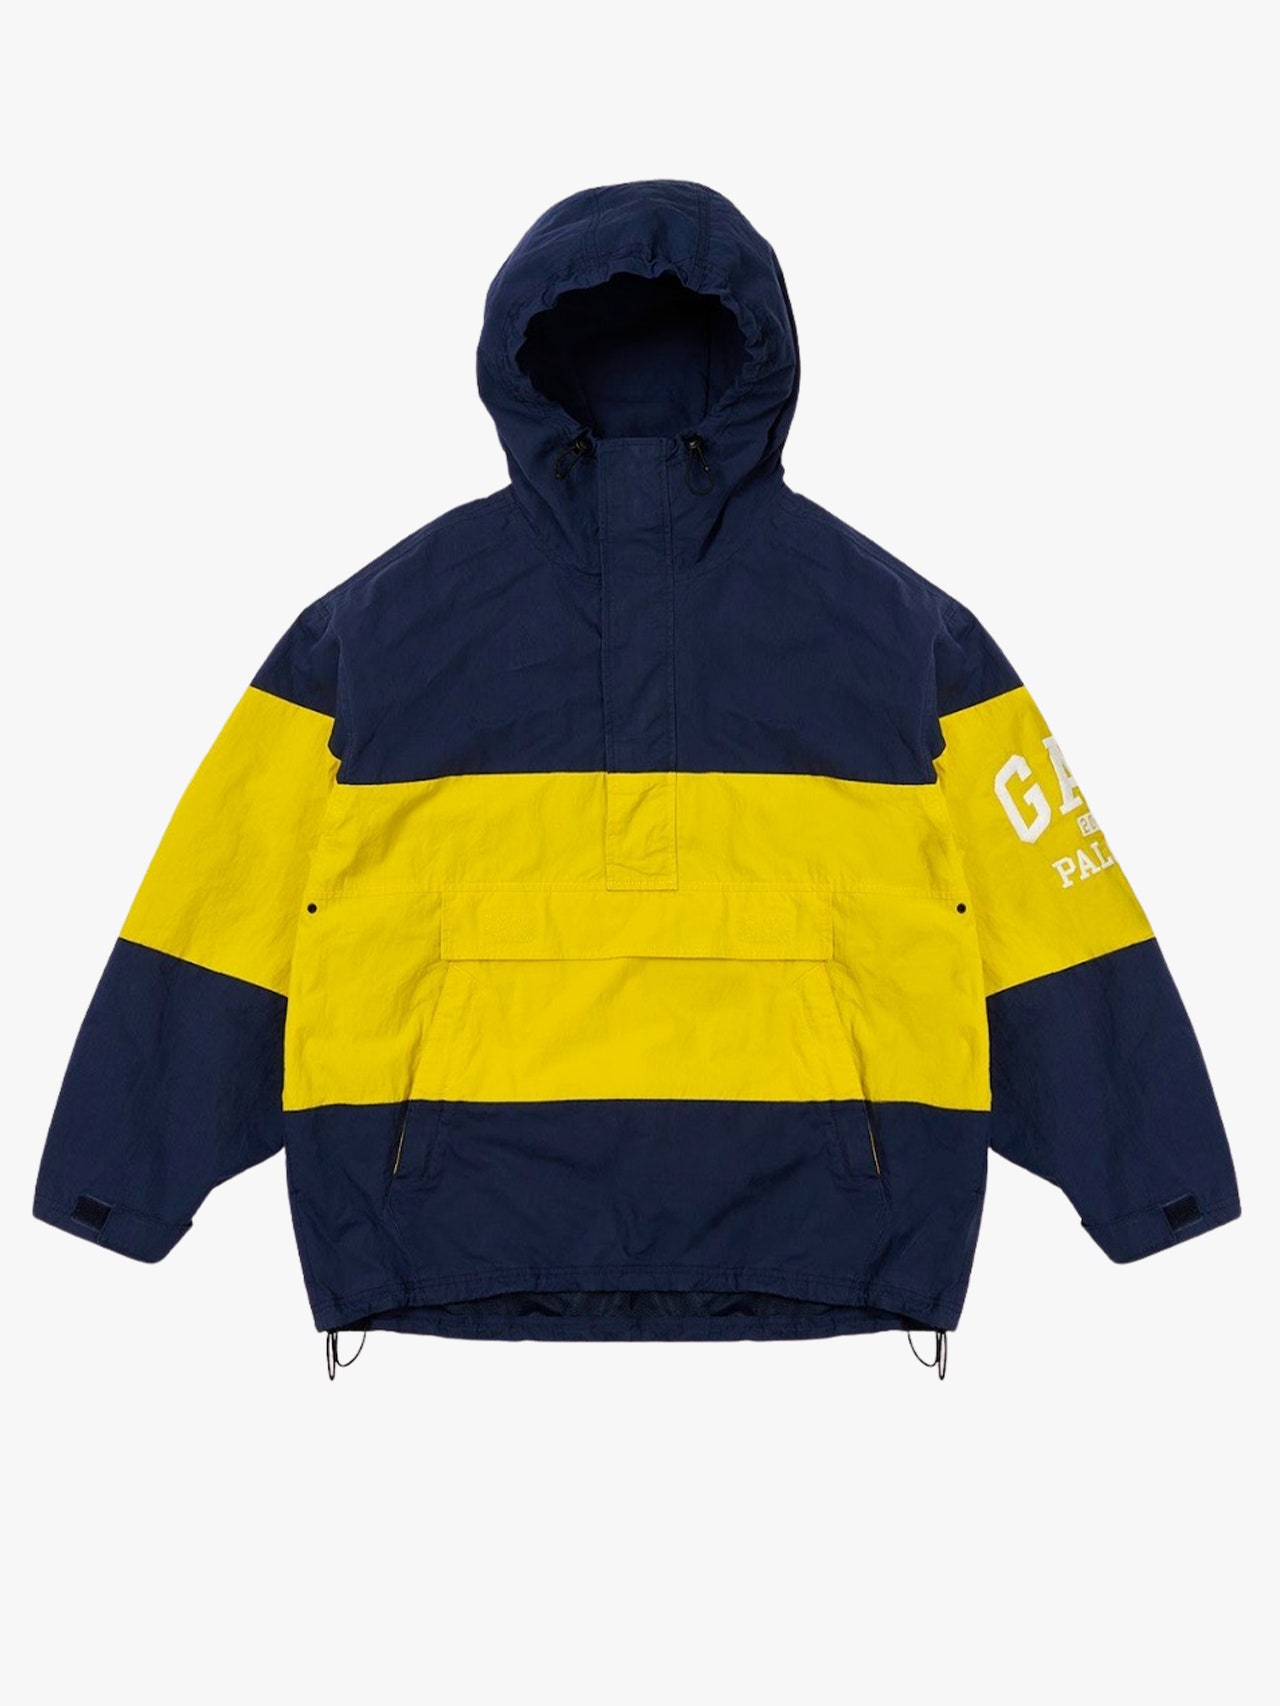 The waviest anorak you can wear to protect against those imminent spring showers.<p>Sign up for GQ’s Daily newsletter and get everything from breaking fashion news to celebrity profiles to exclusive daily deals sent straight to your inbox.</p><a href="https://www.gq.com/newsletter/daily?sourceCode=msnsend">Sign Up Now</a>